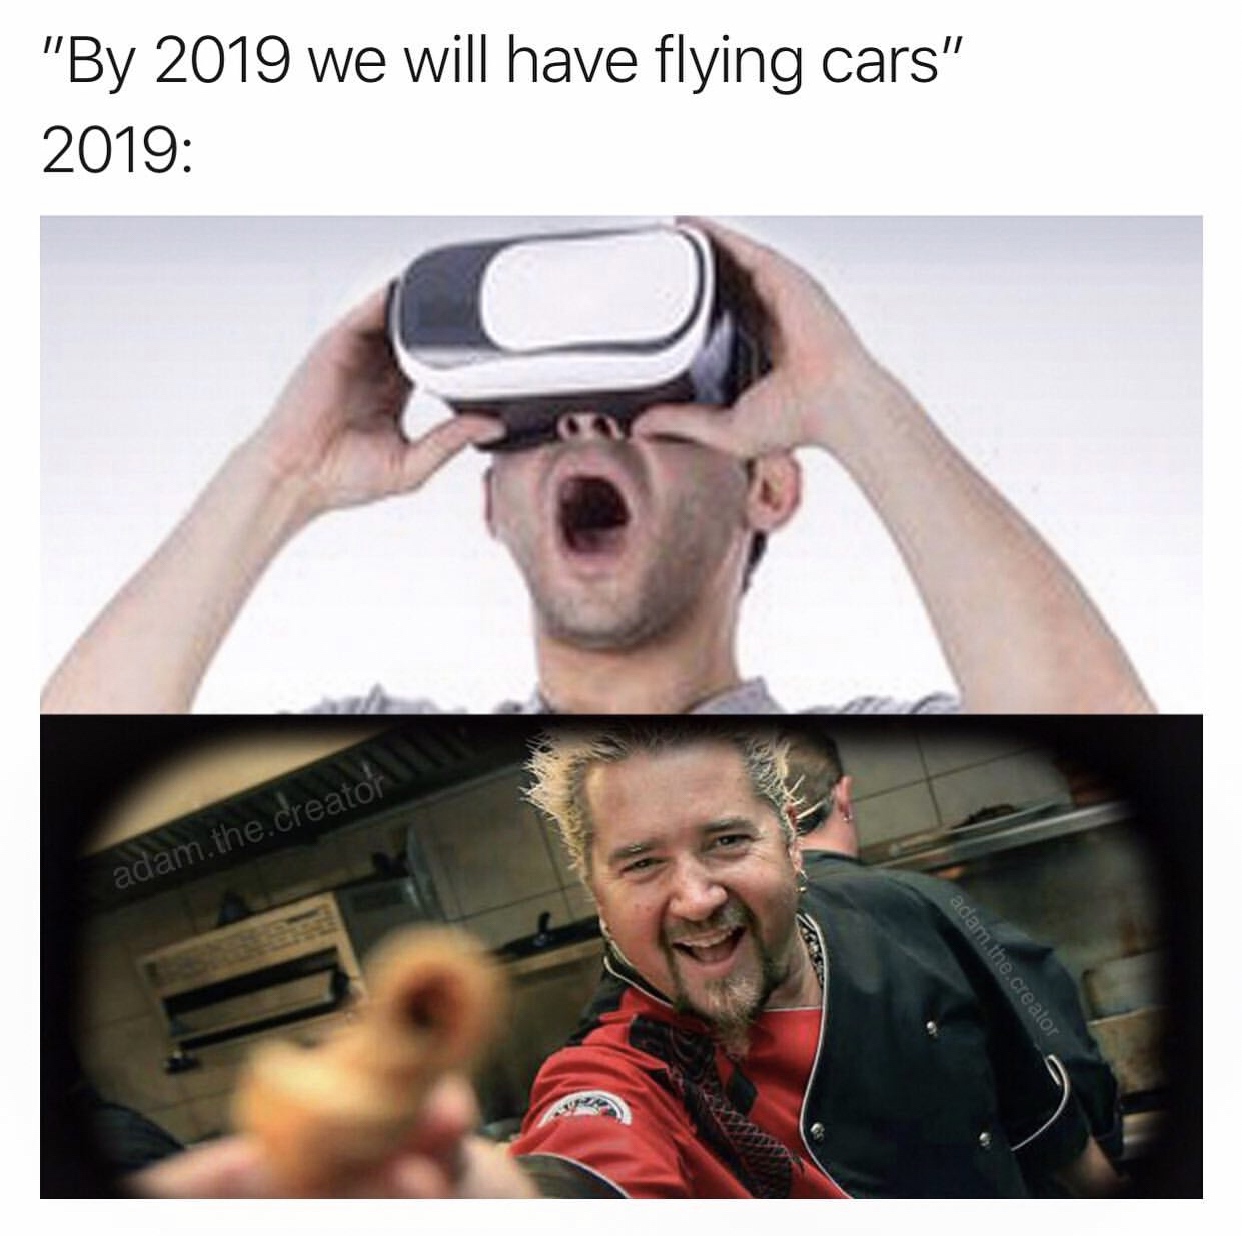 photo caption - "By 2019 we will have flying cars" 2019 adam.the.creator adam.the creator